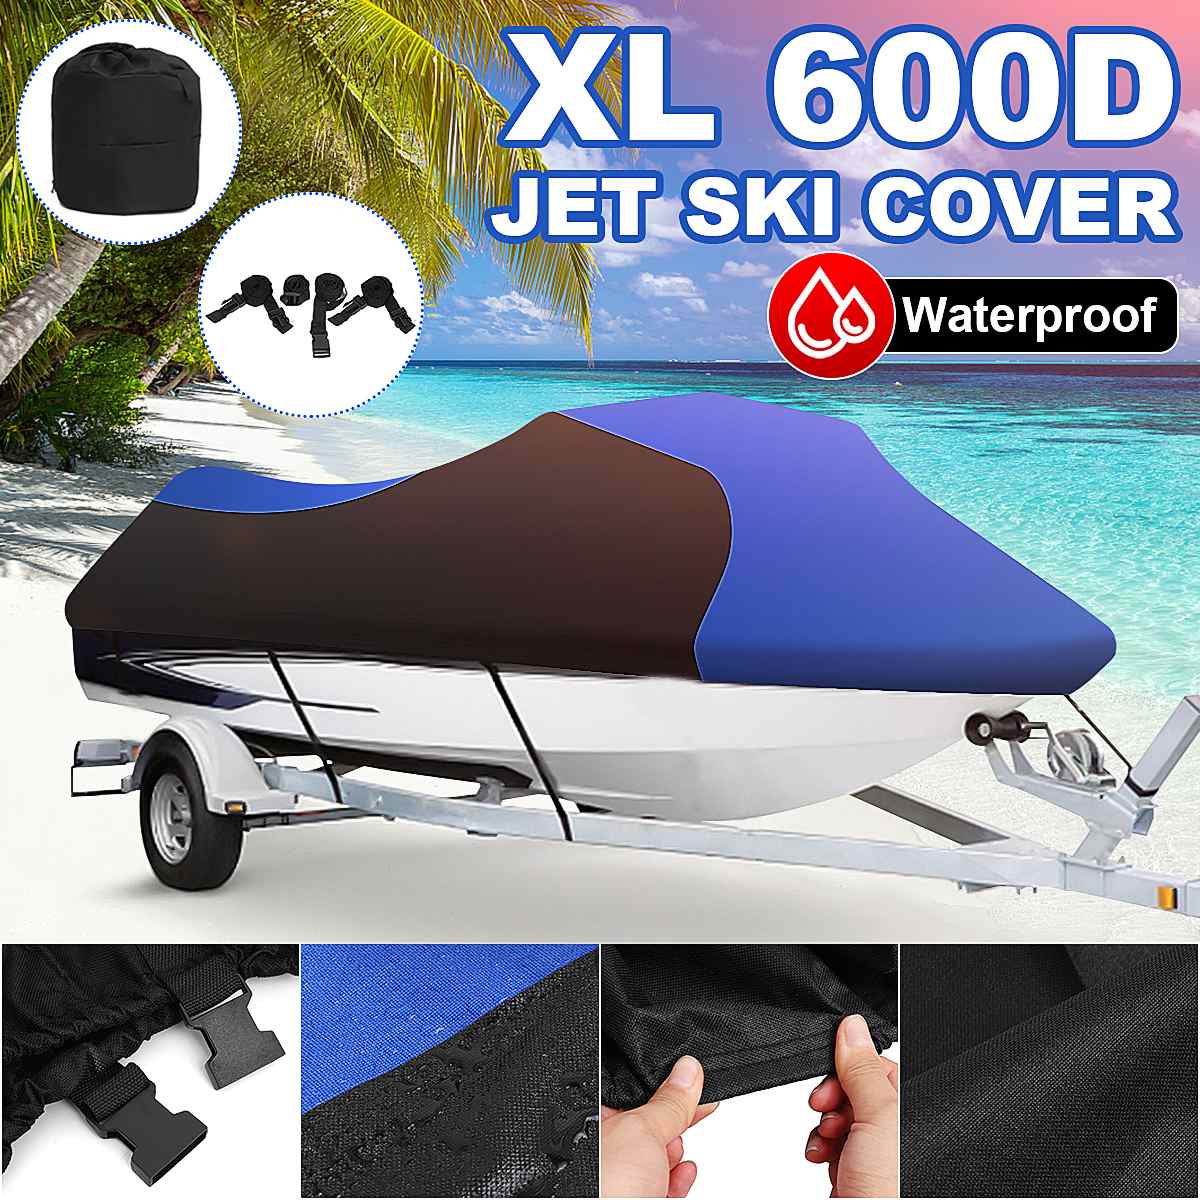 600D Waterproof Trailerable Boat Cover Jet Ski Outboard Motor Hood Cover Engine Protector Oxford Cloth 30cmx18cm 380cm x 260cm - lebenoutdoors